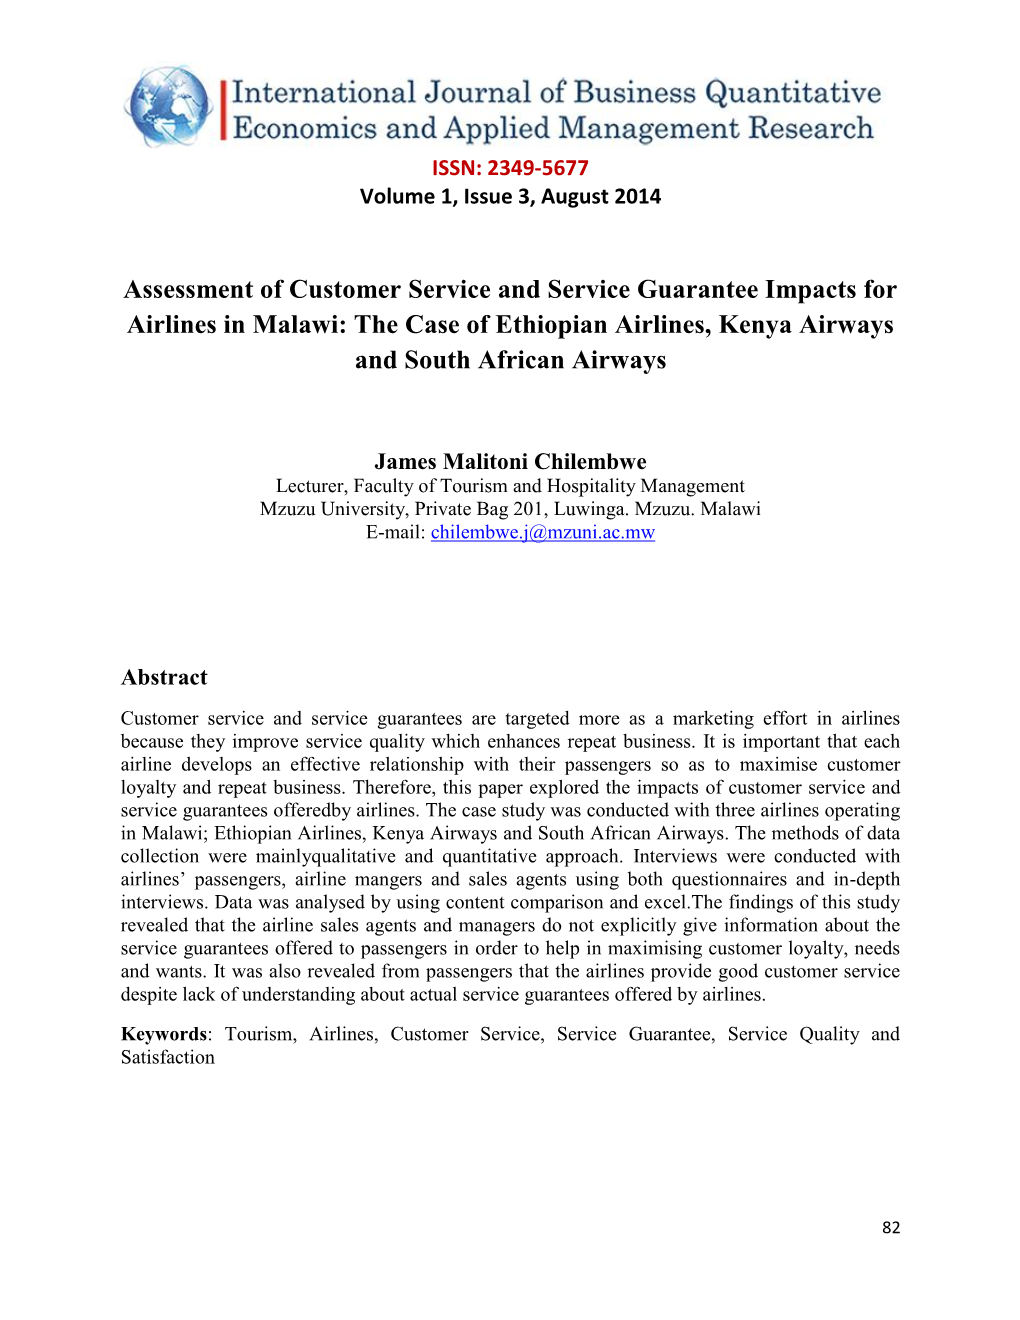 Assessment of Customer Service and Service Guarantee Impacts for Airlines in Malawi: the Case of Ethiopian Airlines, Kenya Airways and South African Airways